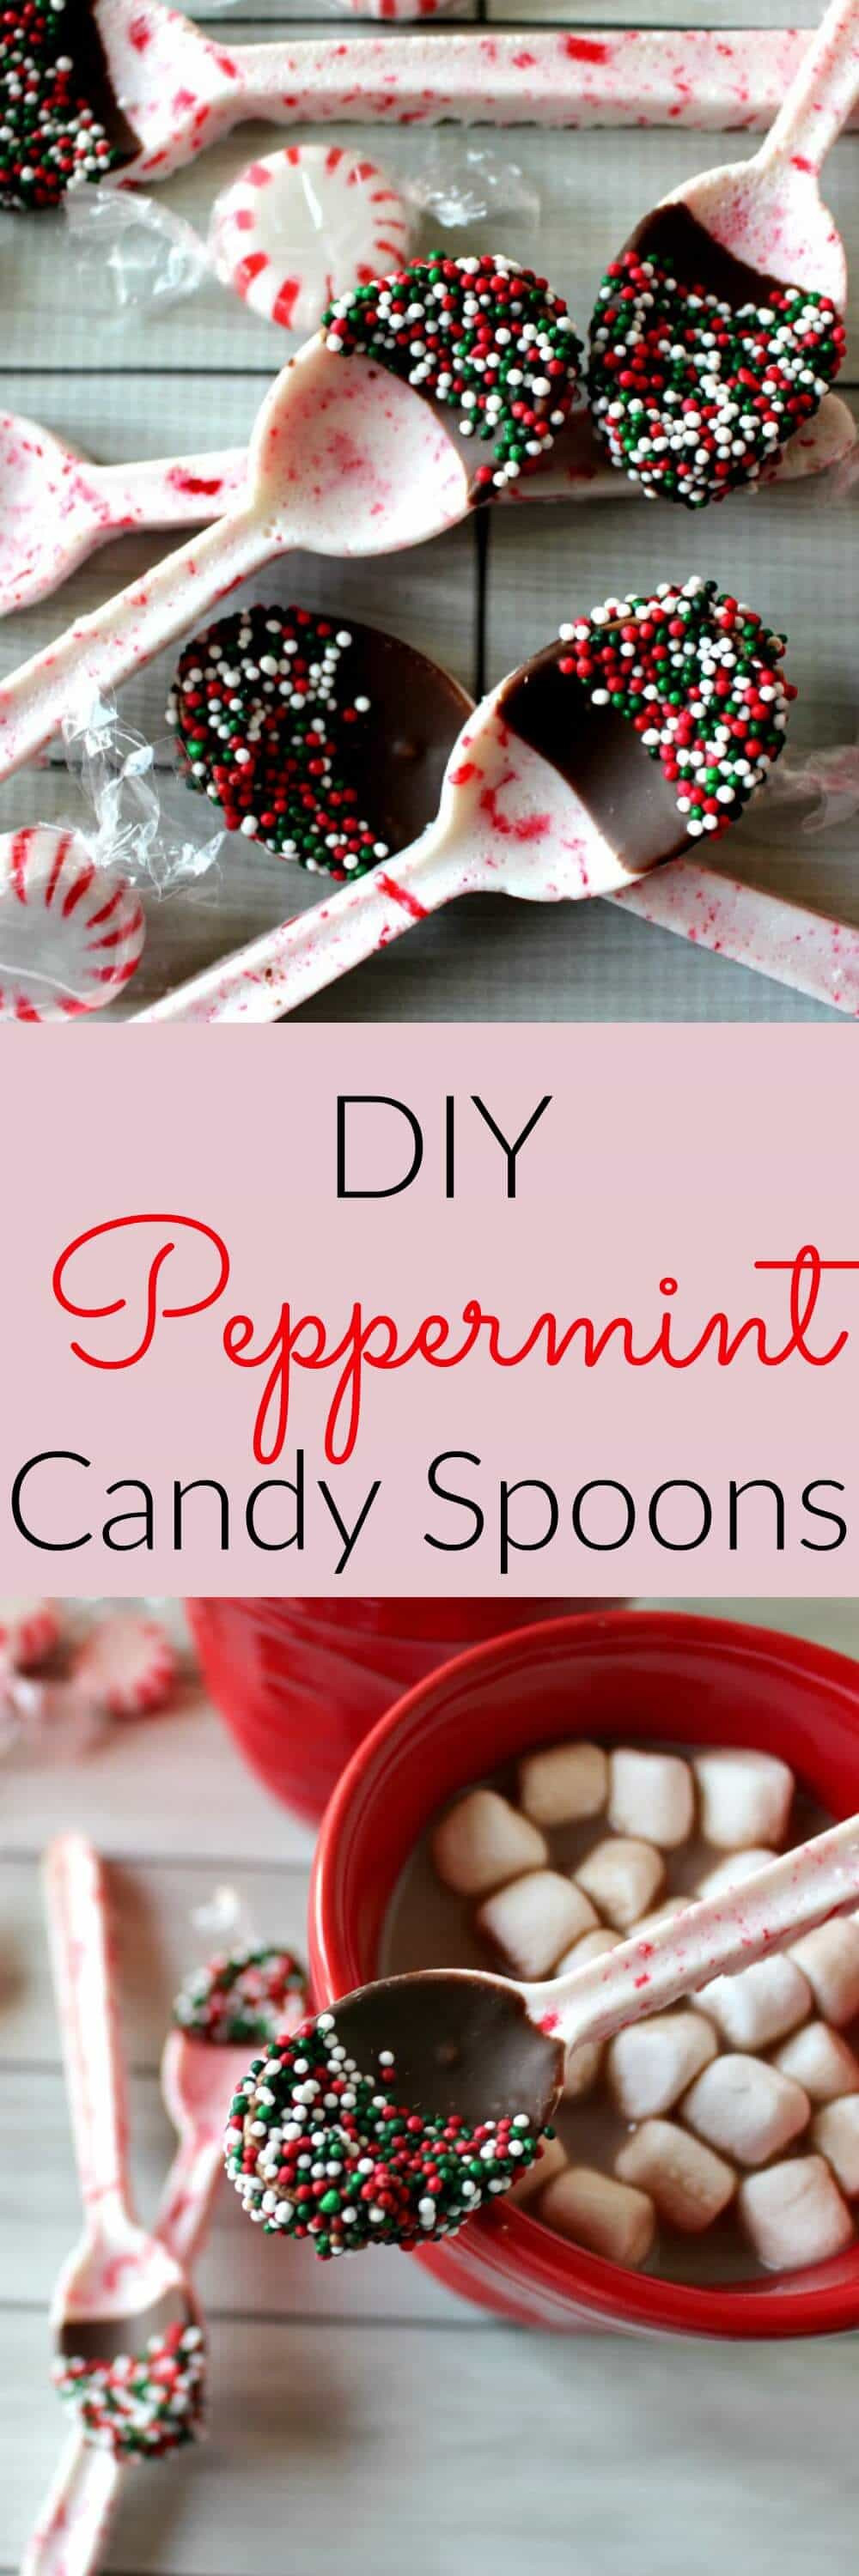 Candy Christmas Gifts
 DIY Peppermint Candy Spoons Princess Pinky Girl